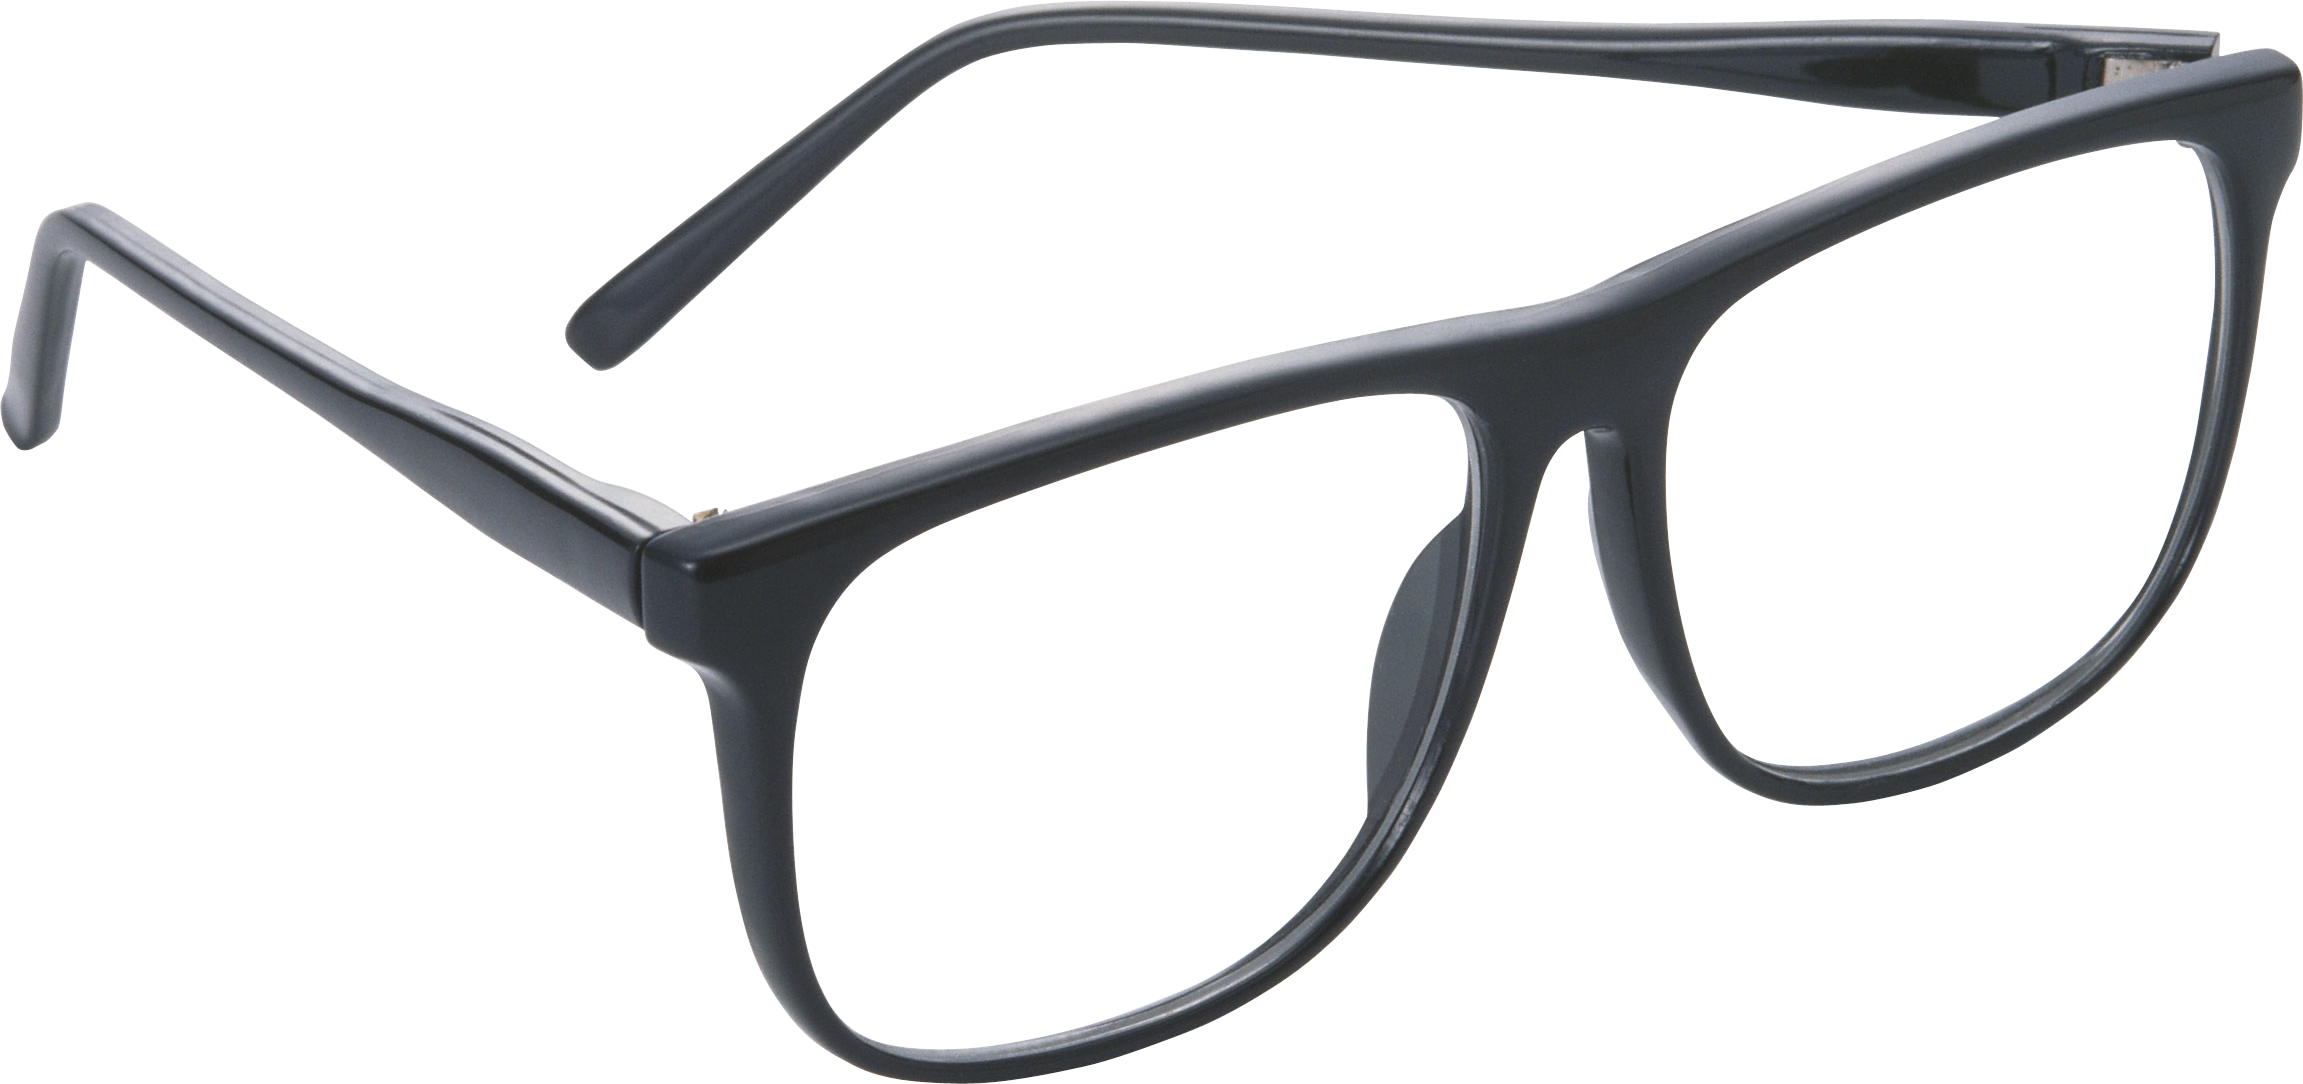 Spectacles Glasses Download HQ PNG Clipart